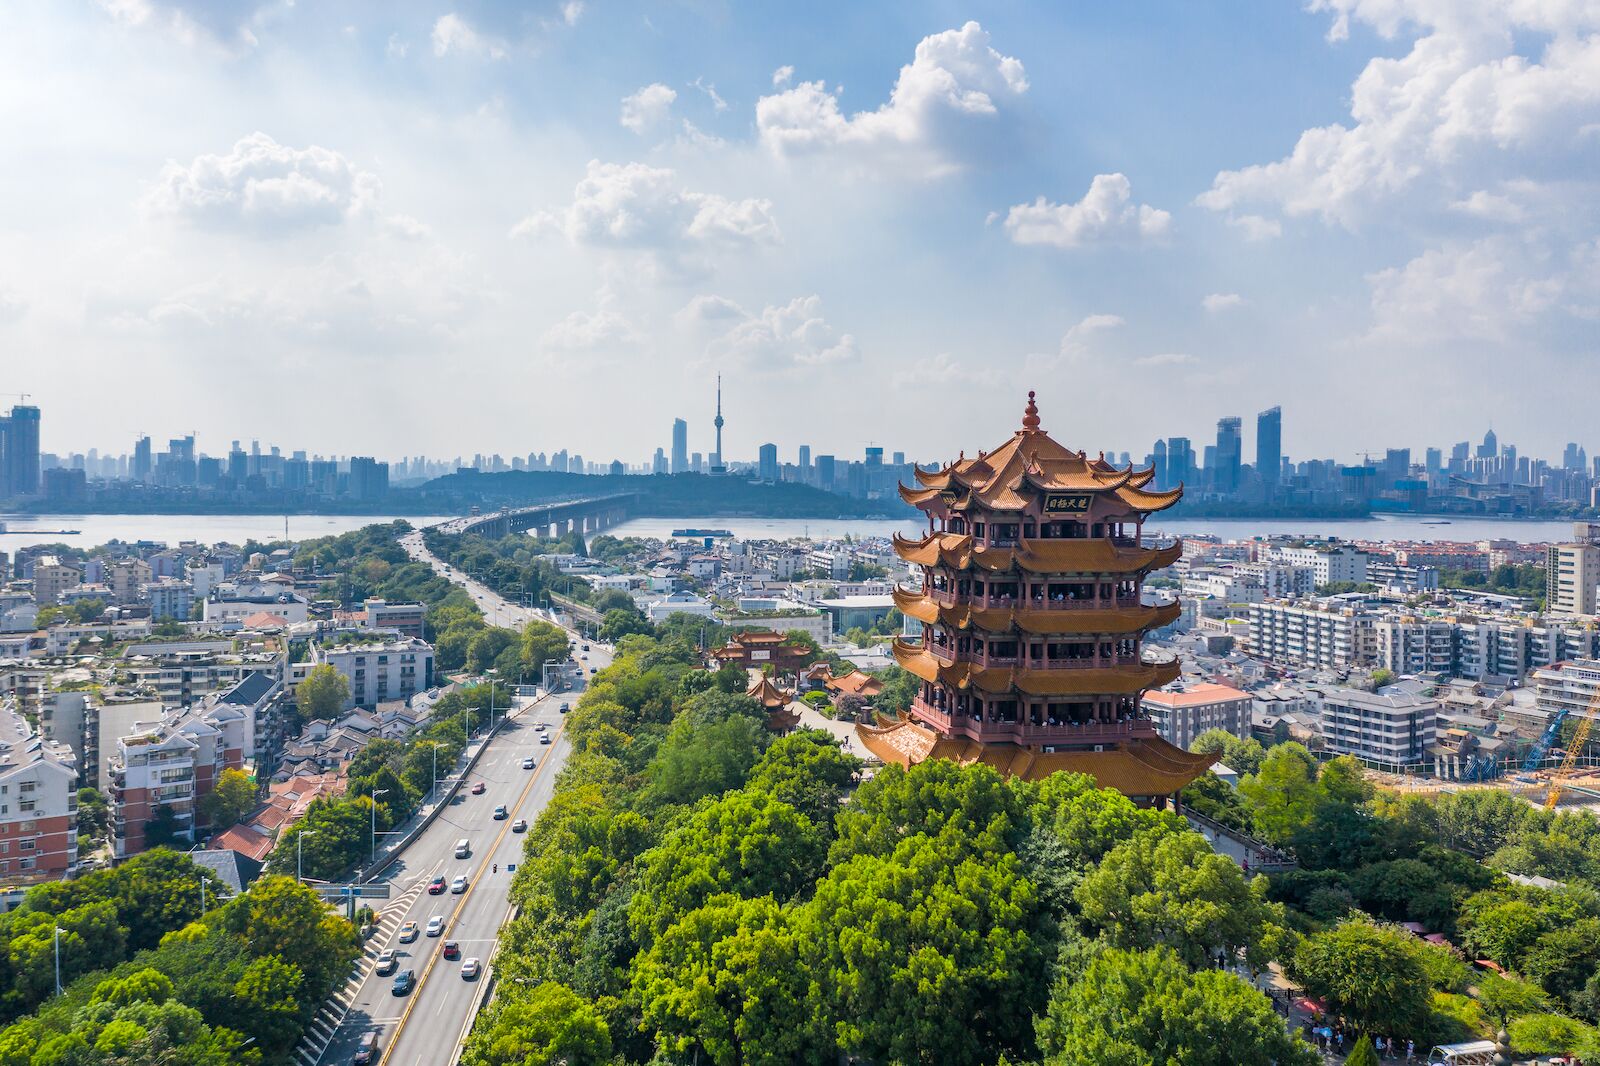 Aerial view of Wuhan city. The yellow crane tower, located on snake hill in Wuhan.